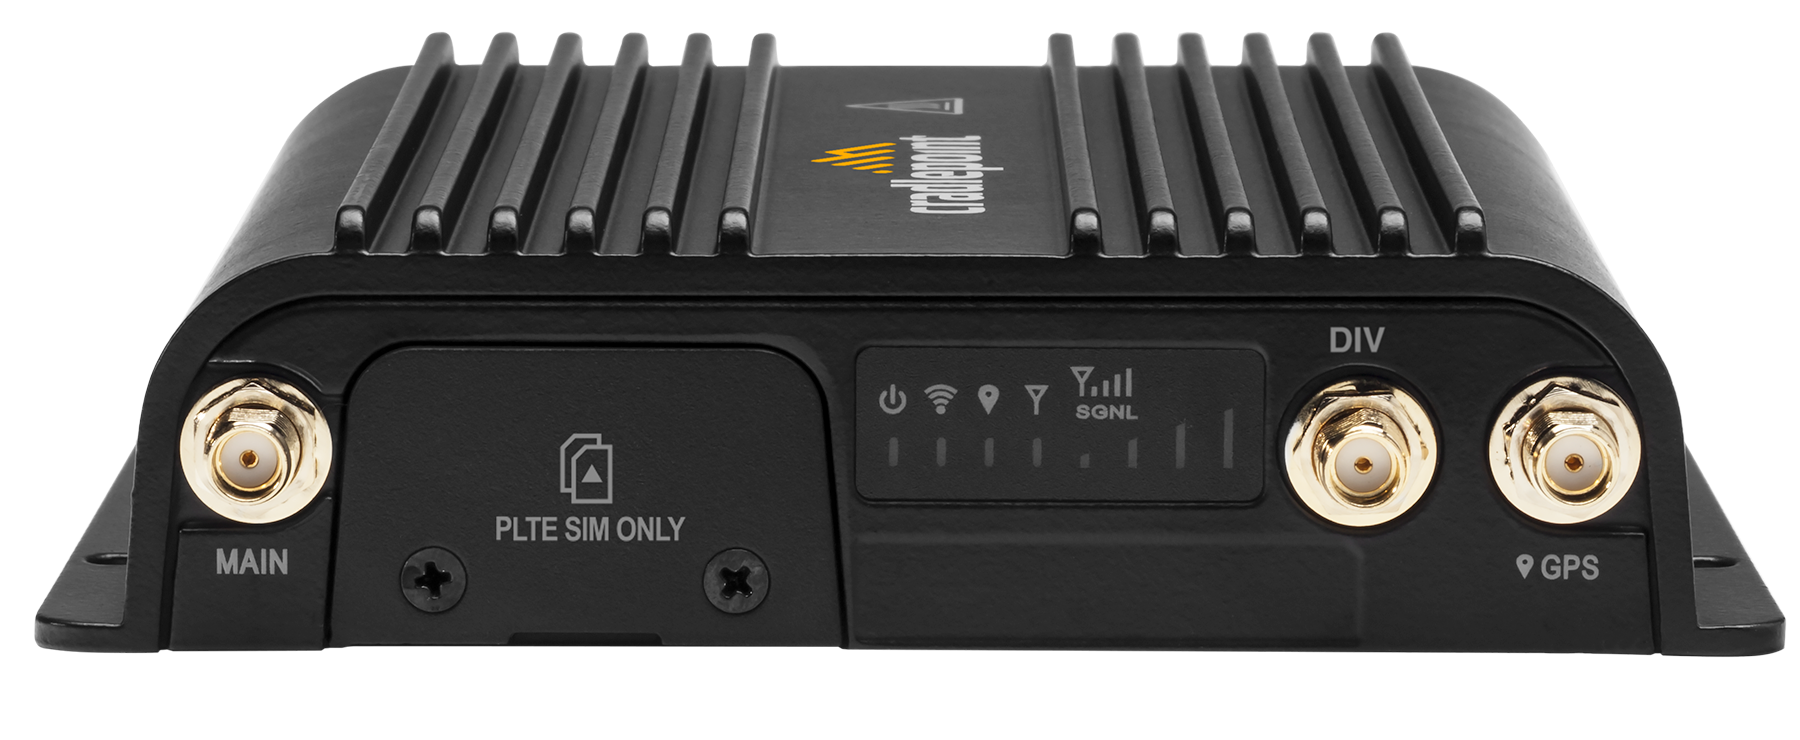 r500-plte-fea-img-1800x740-1 Cradlepoint Wireless Routers